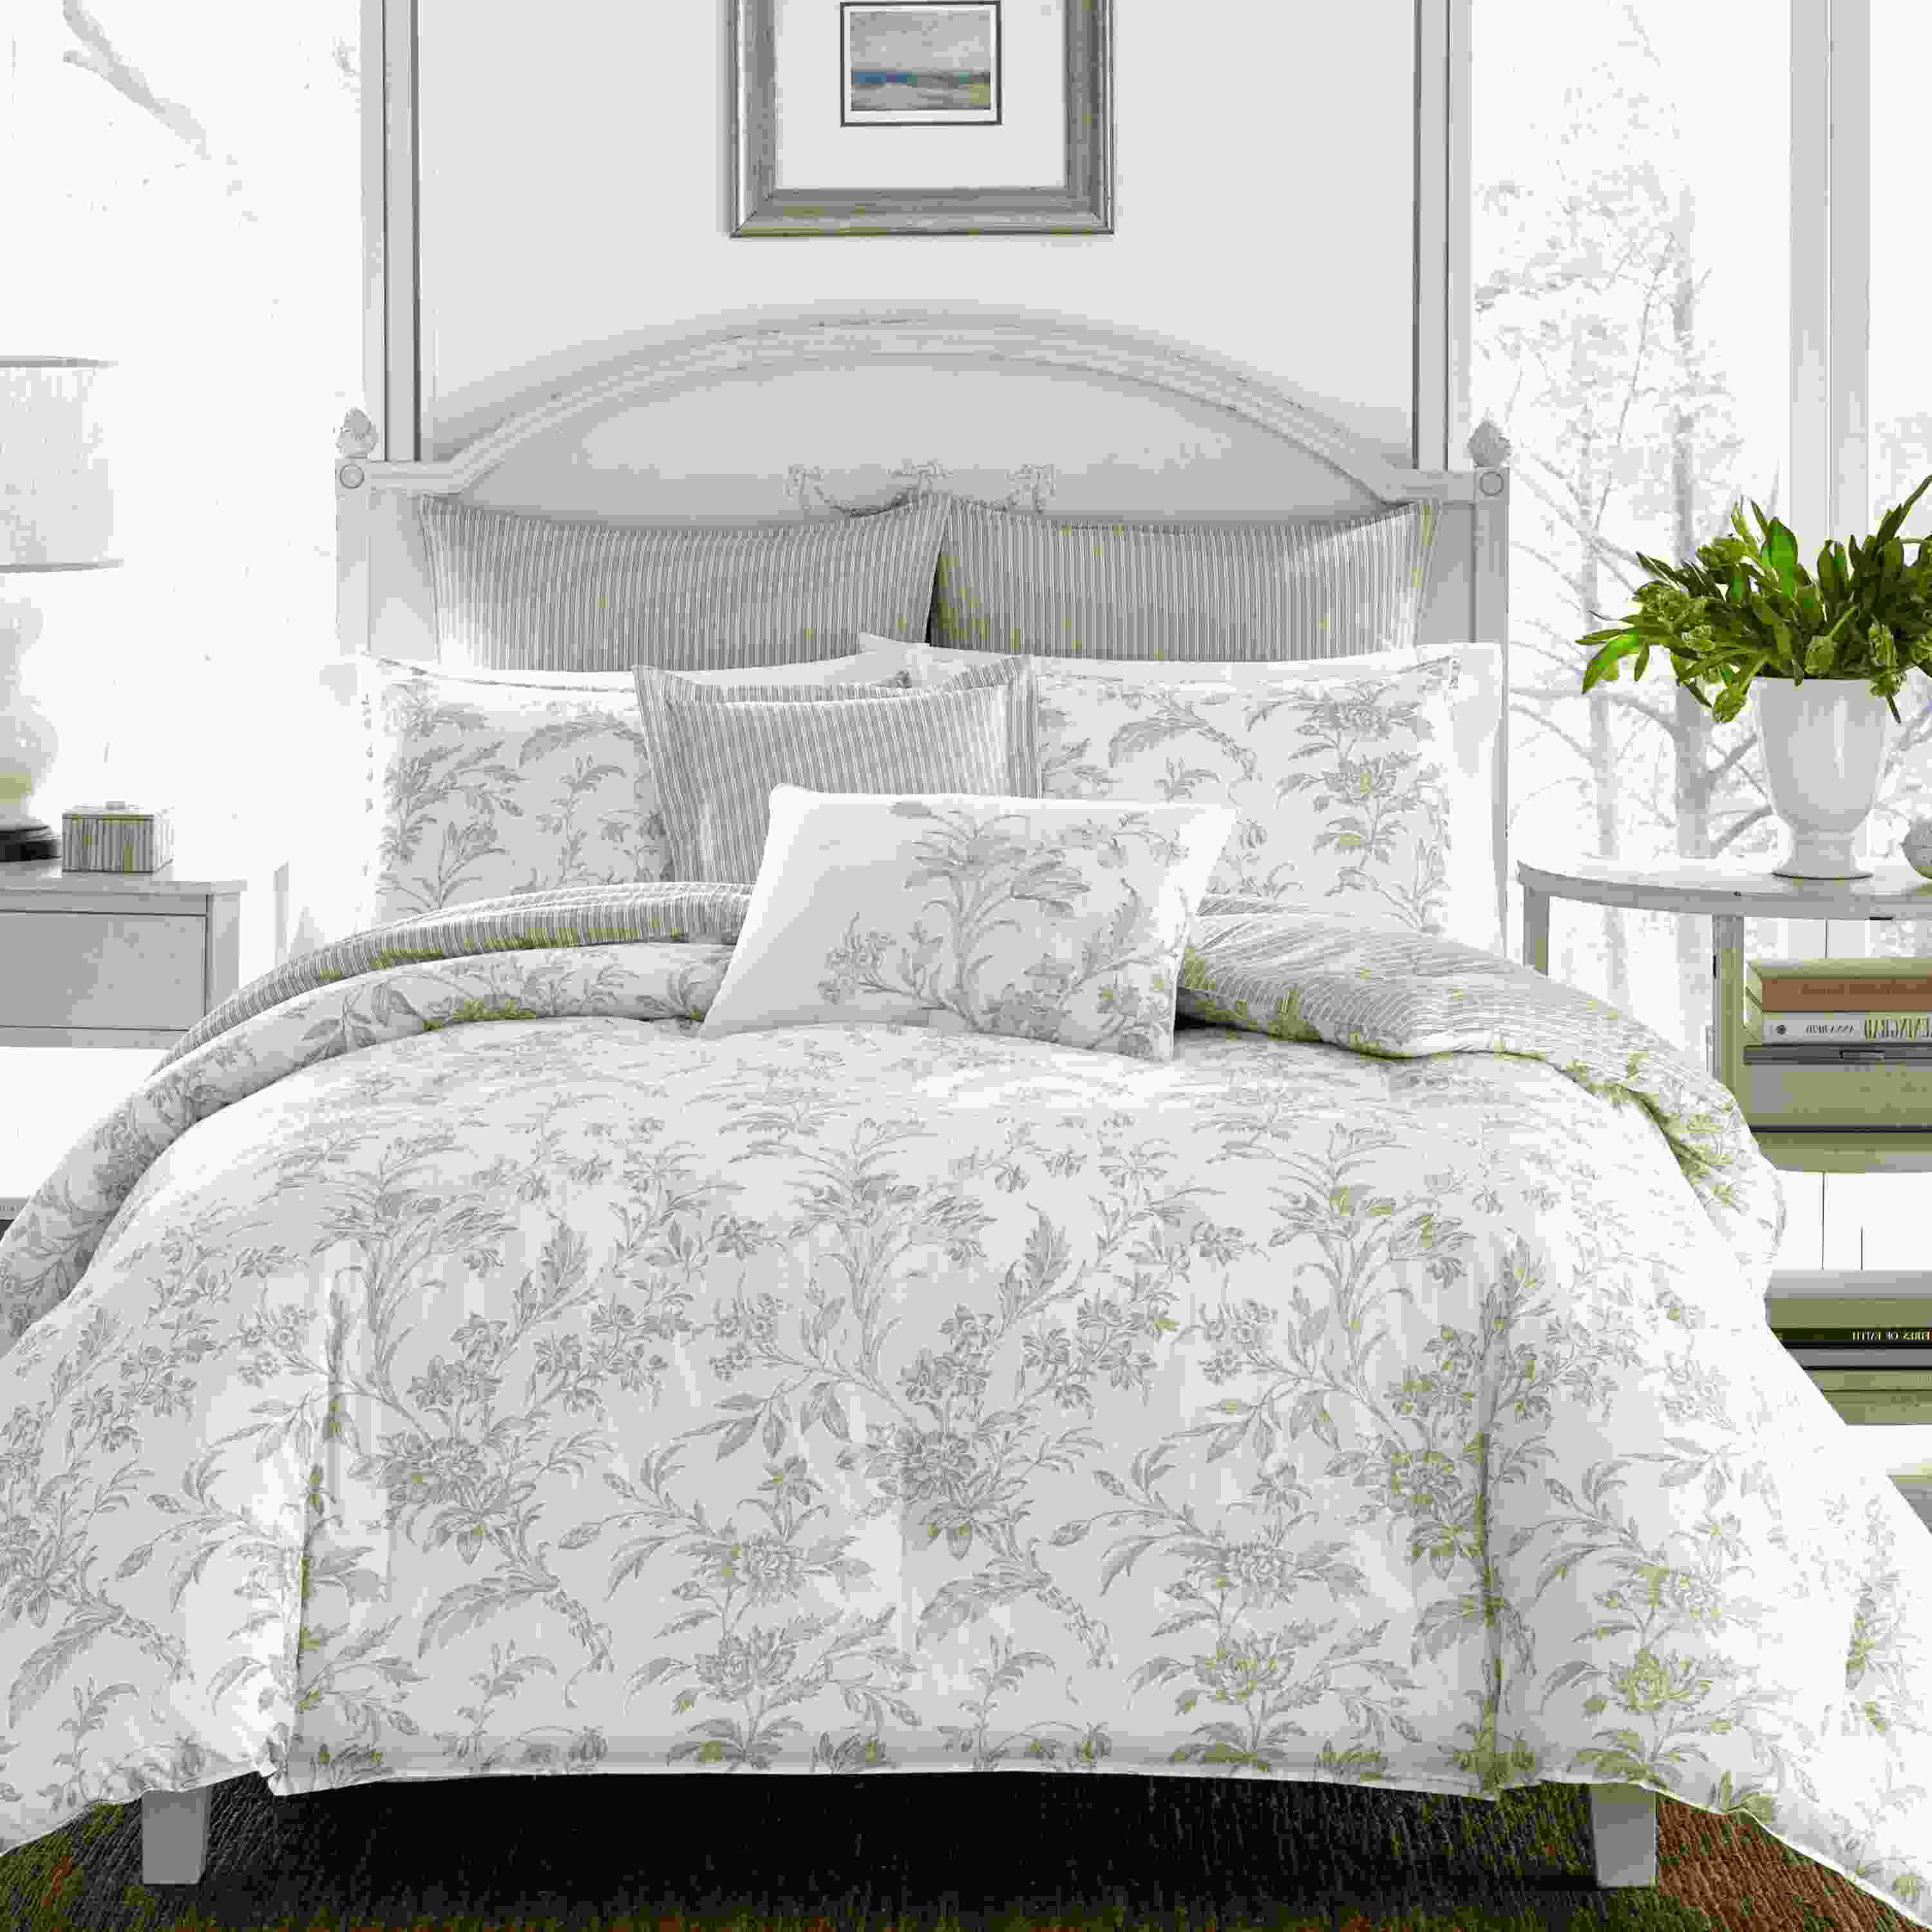 Laura Ashley Duvet Cover For Sale In Uk View 68 Ads